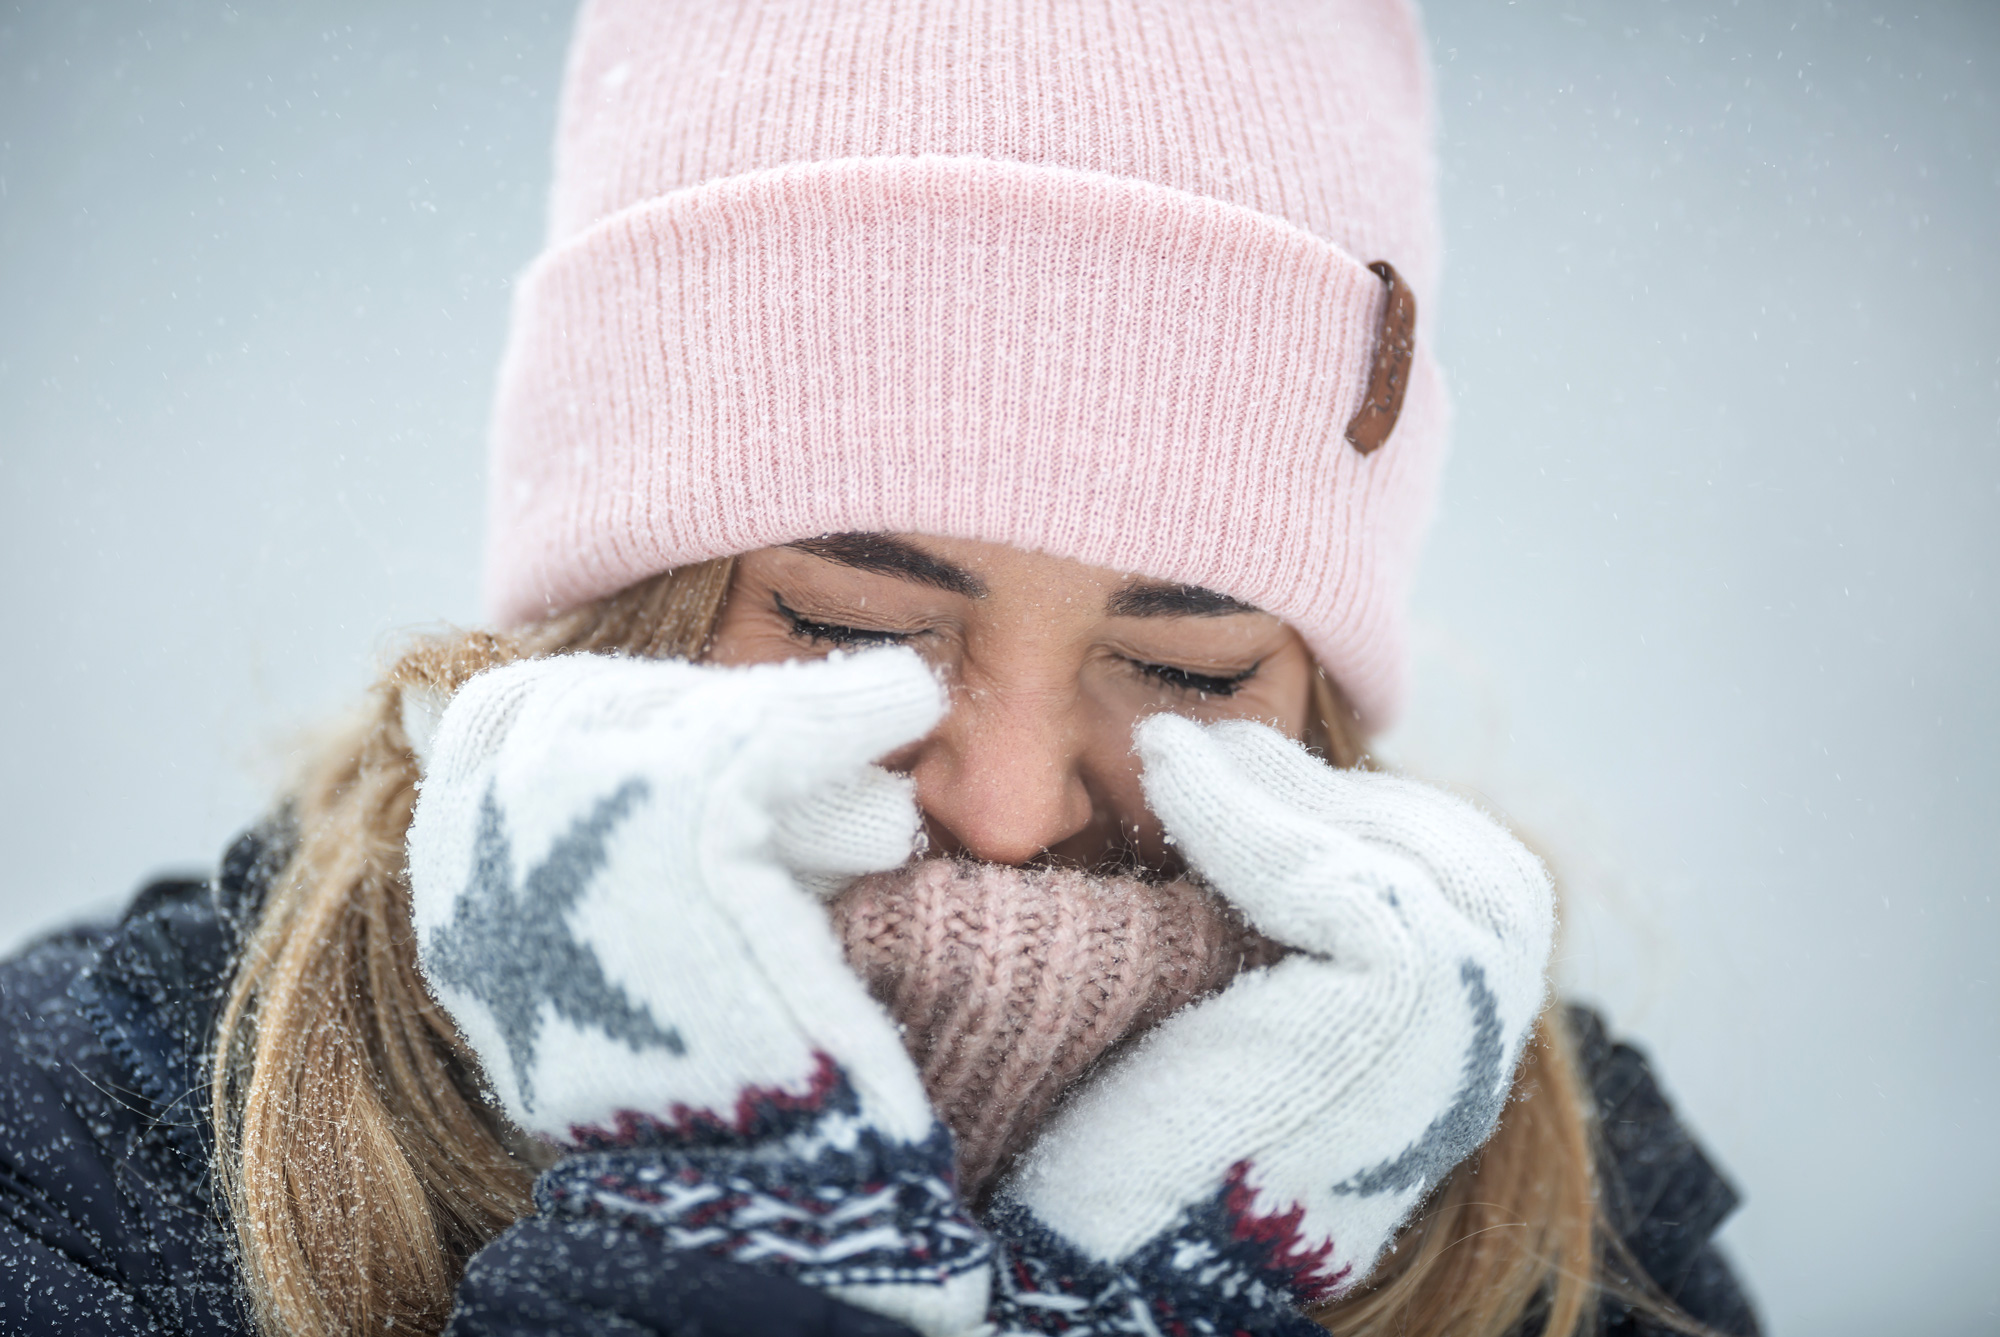 Woman bundled in warm clothes outside cringing